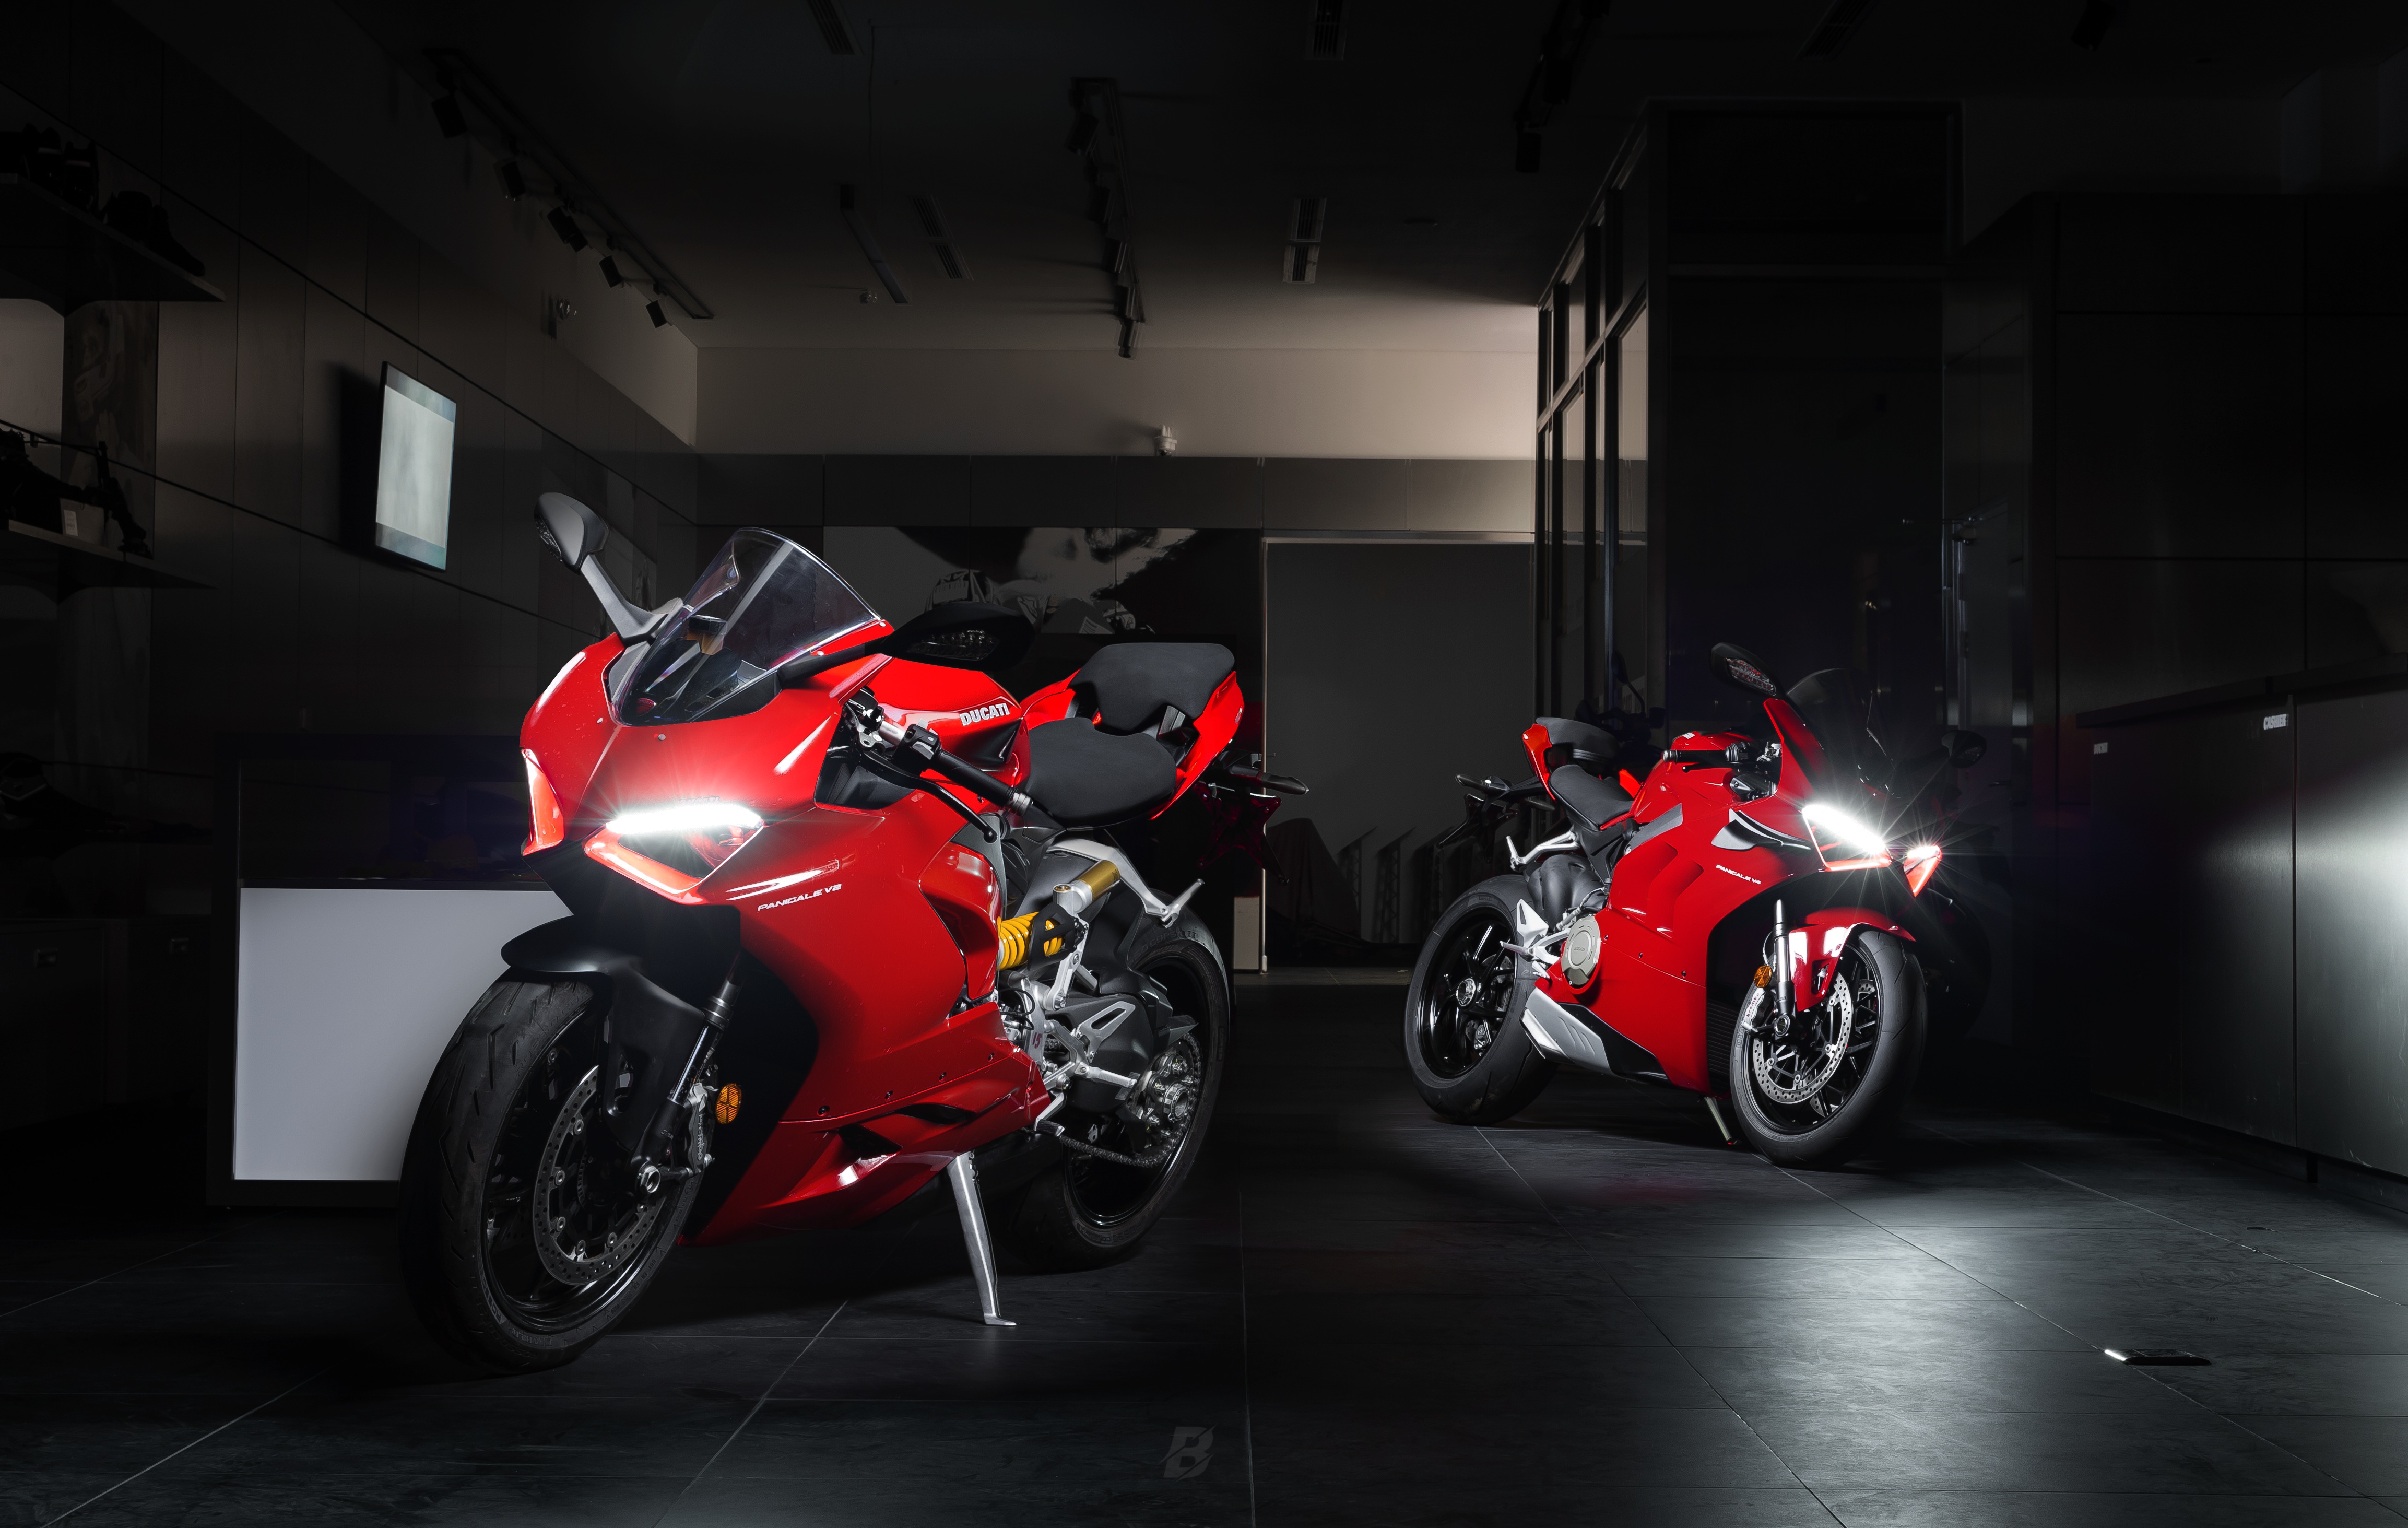 Vehicles Ducati Panigale V4 HD Wallpaper | Background Image